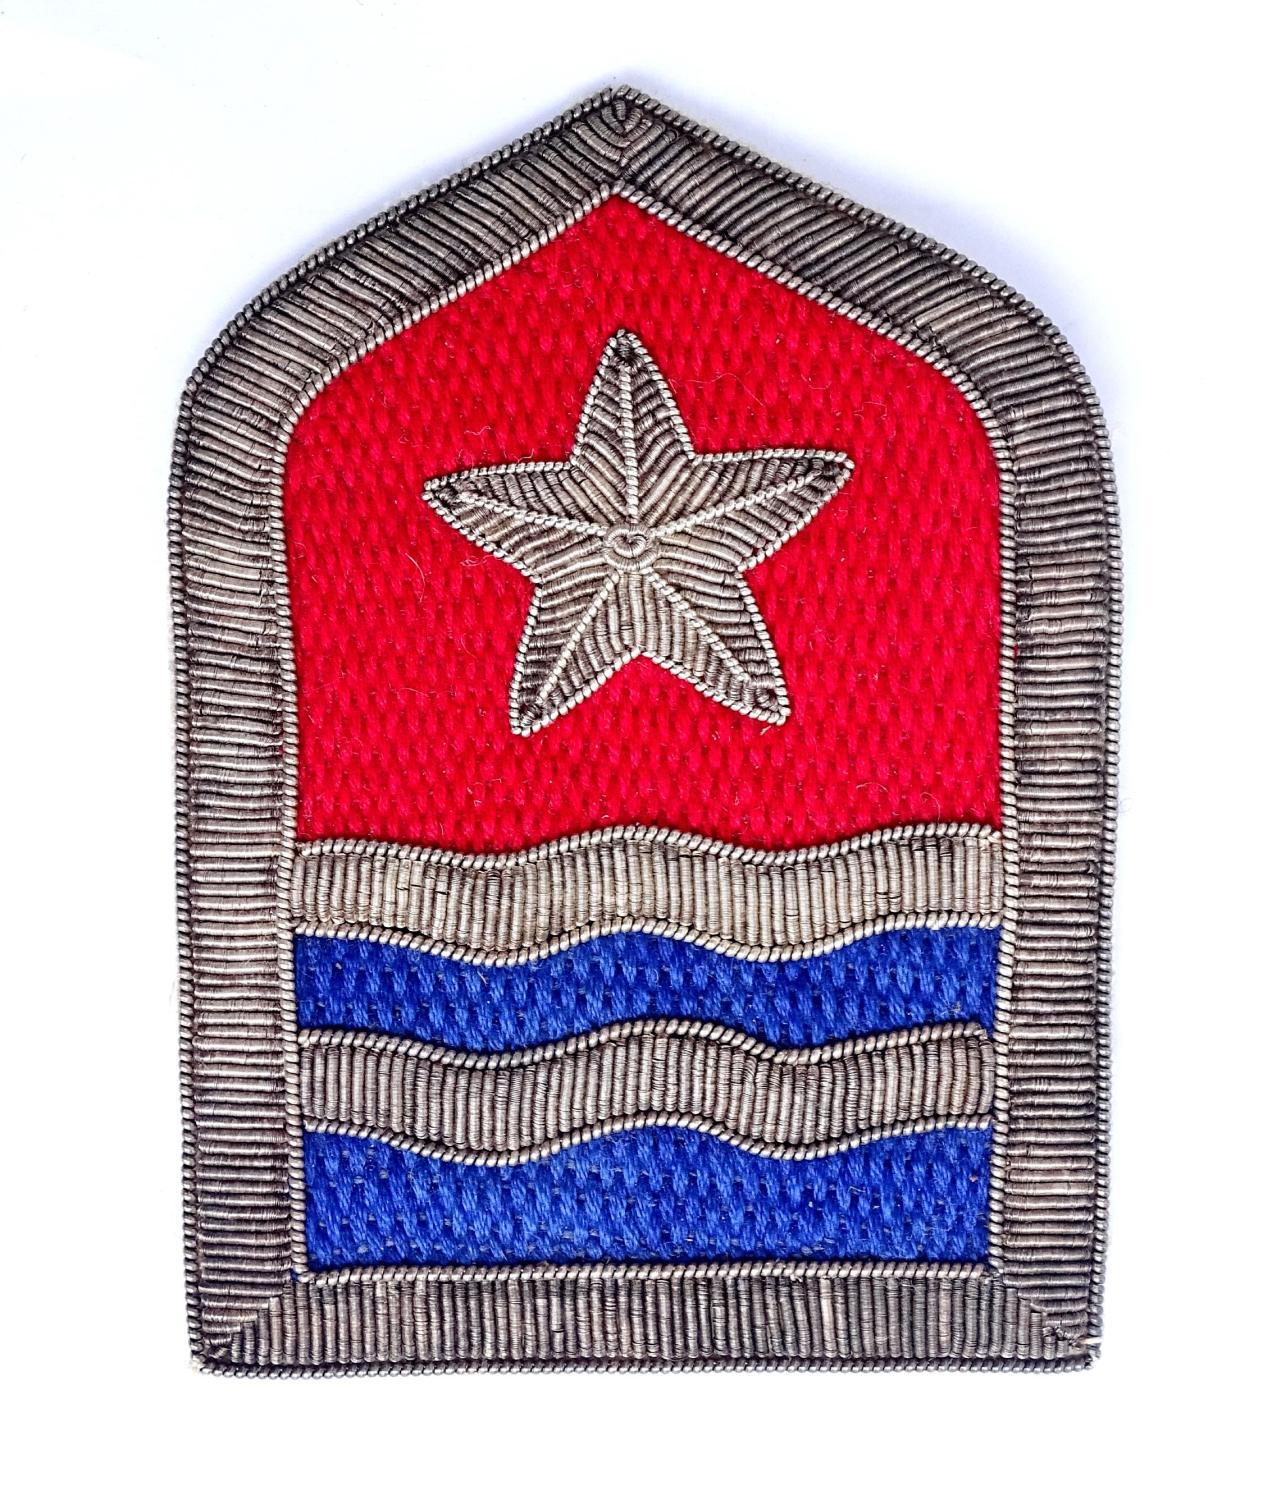 Patch U.S. Army  Middle East Command  Bullion